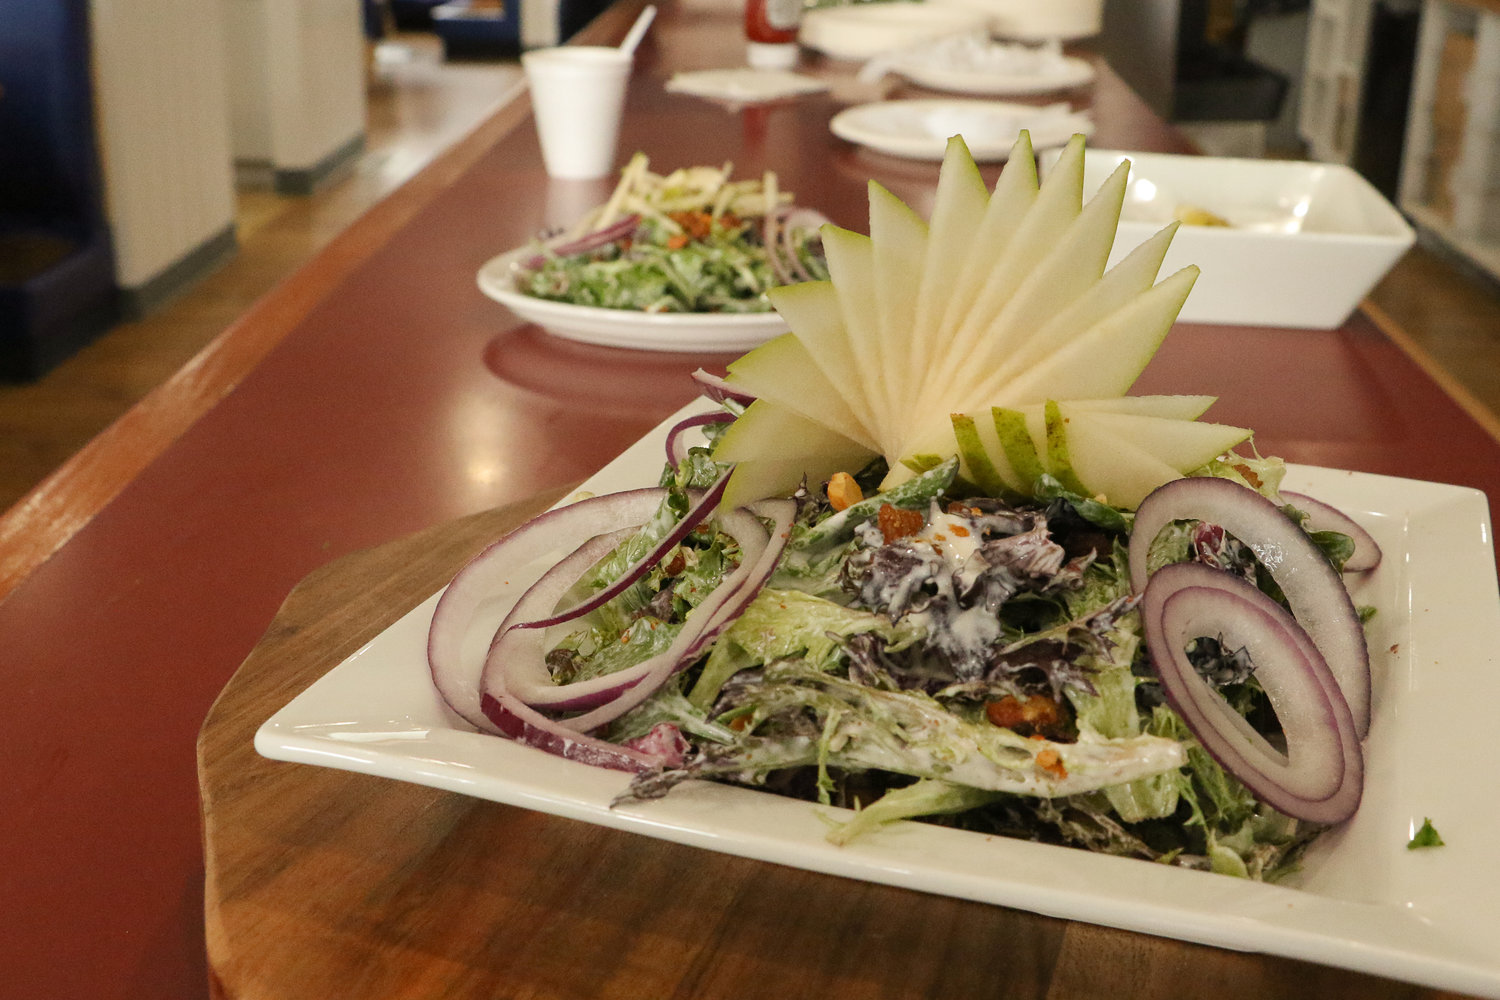 Prepared by Chef Eyner "Rene" Cardona, a bleu cheese salad with candied nuts, red onions and pear slices sits ready to be eaten at a menu sampling for Ocean Prime, Cardona's new restaurant in Chehalis.